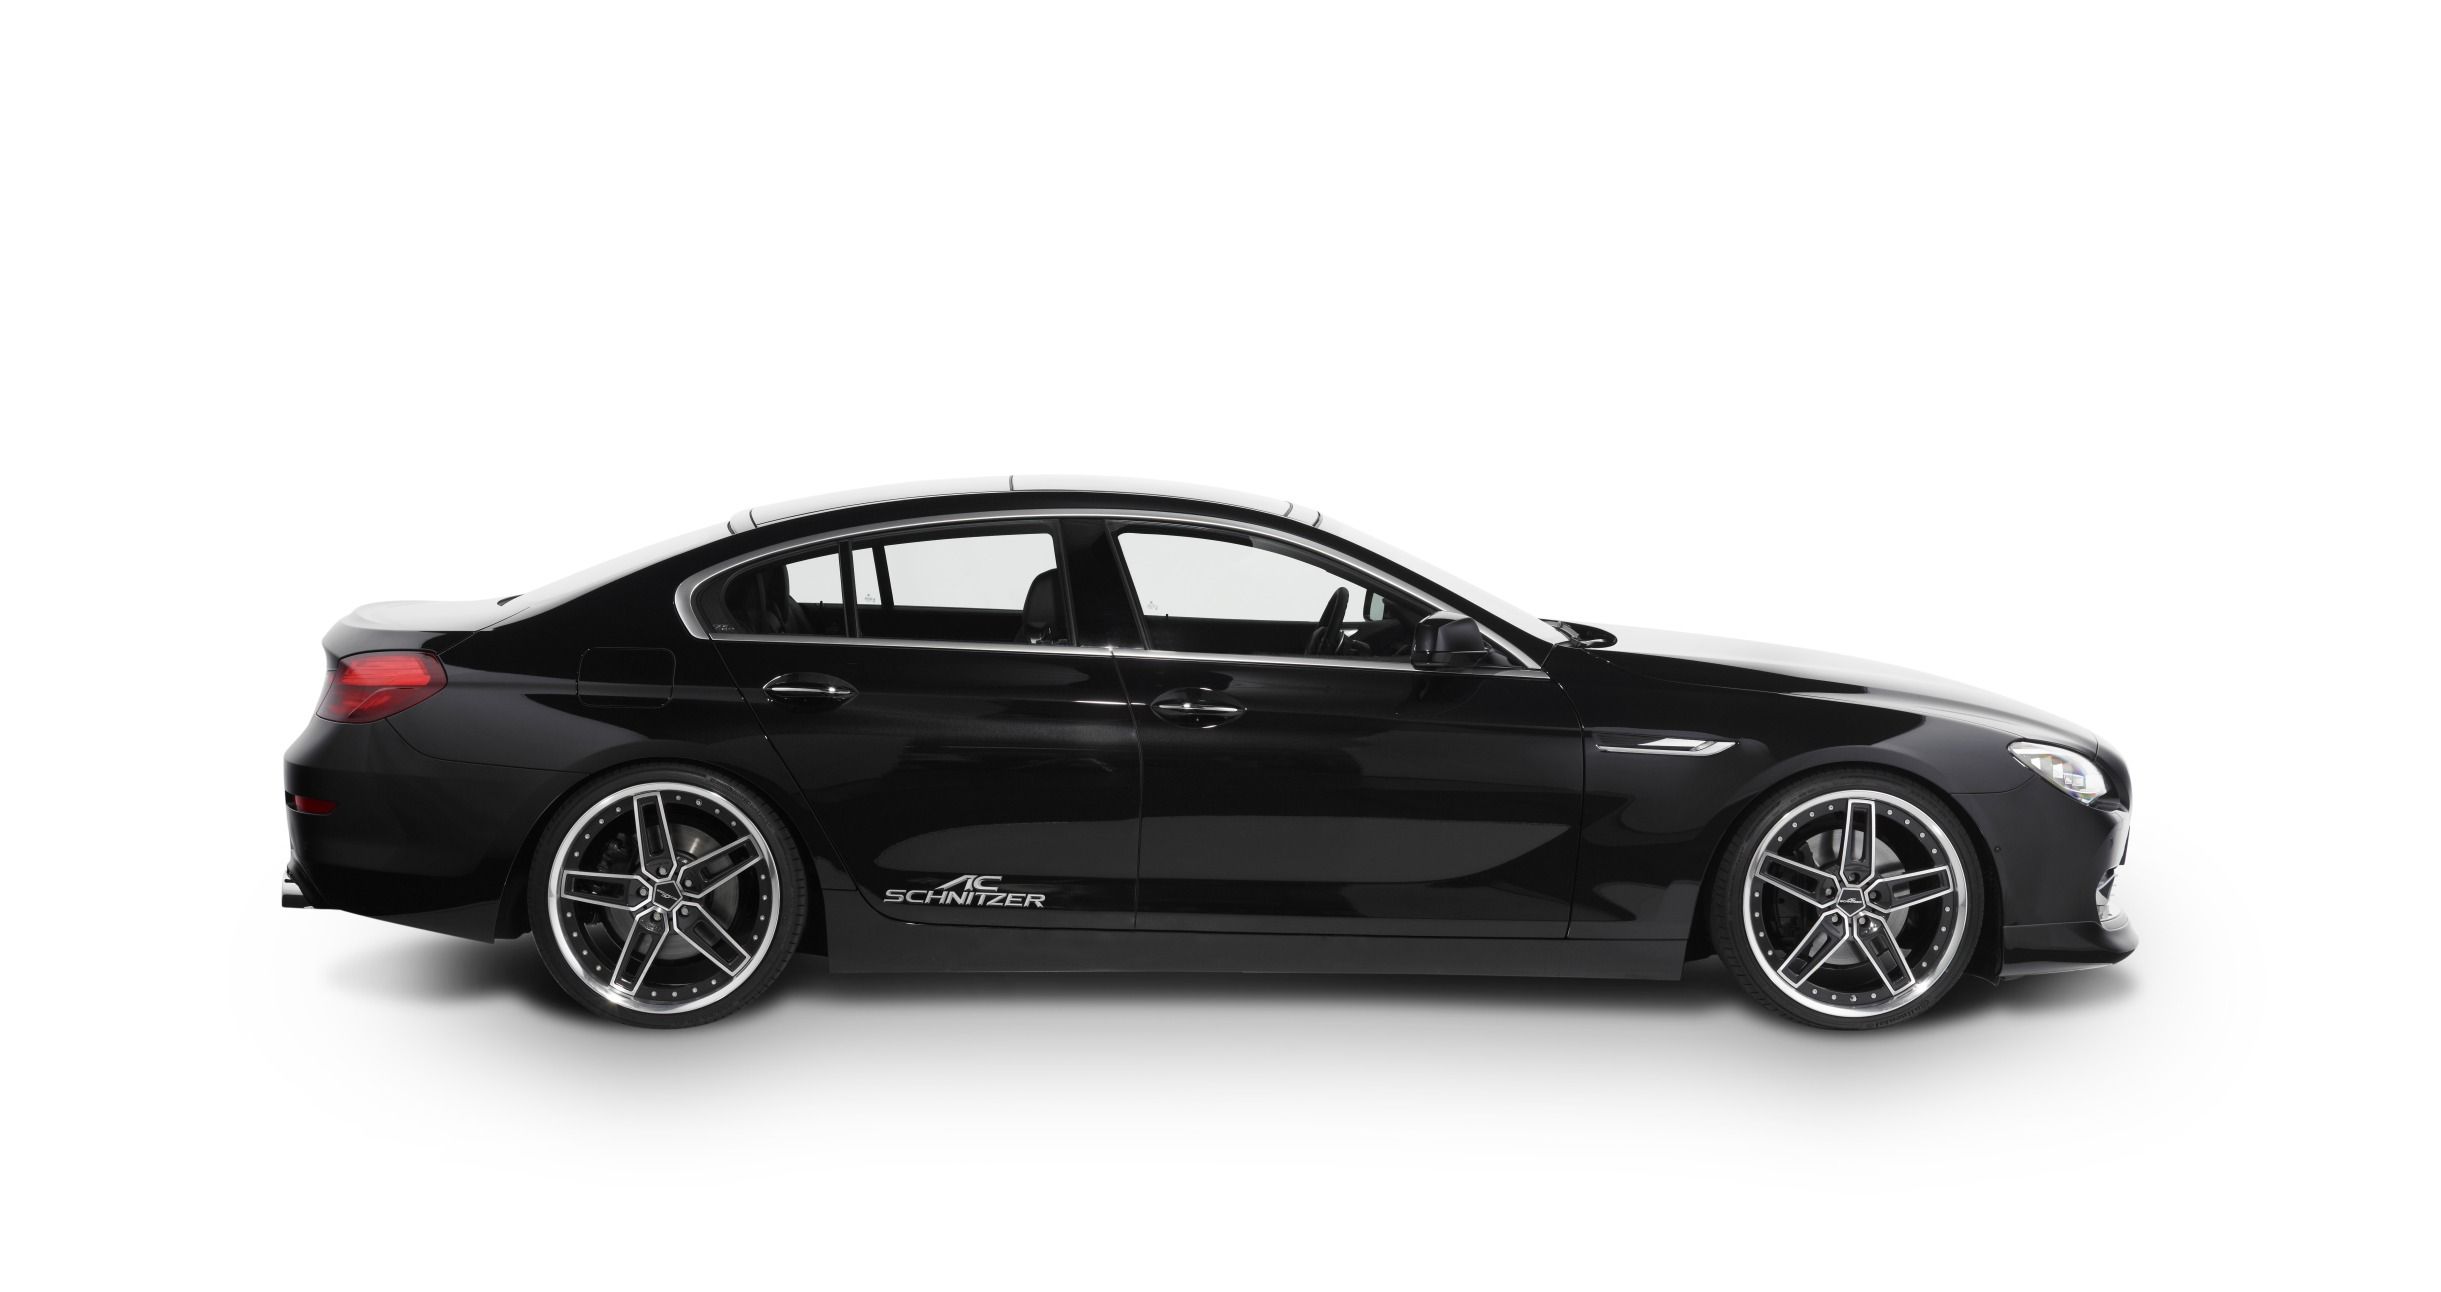 2013 BMW 6-series Gran Coupe by AC Schnitzer